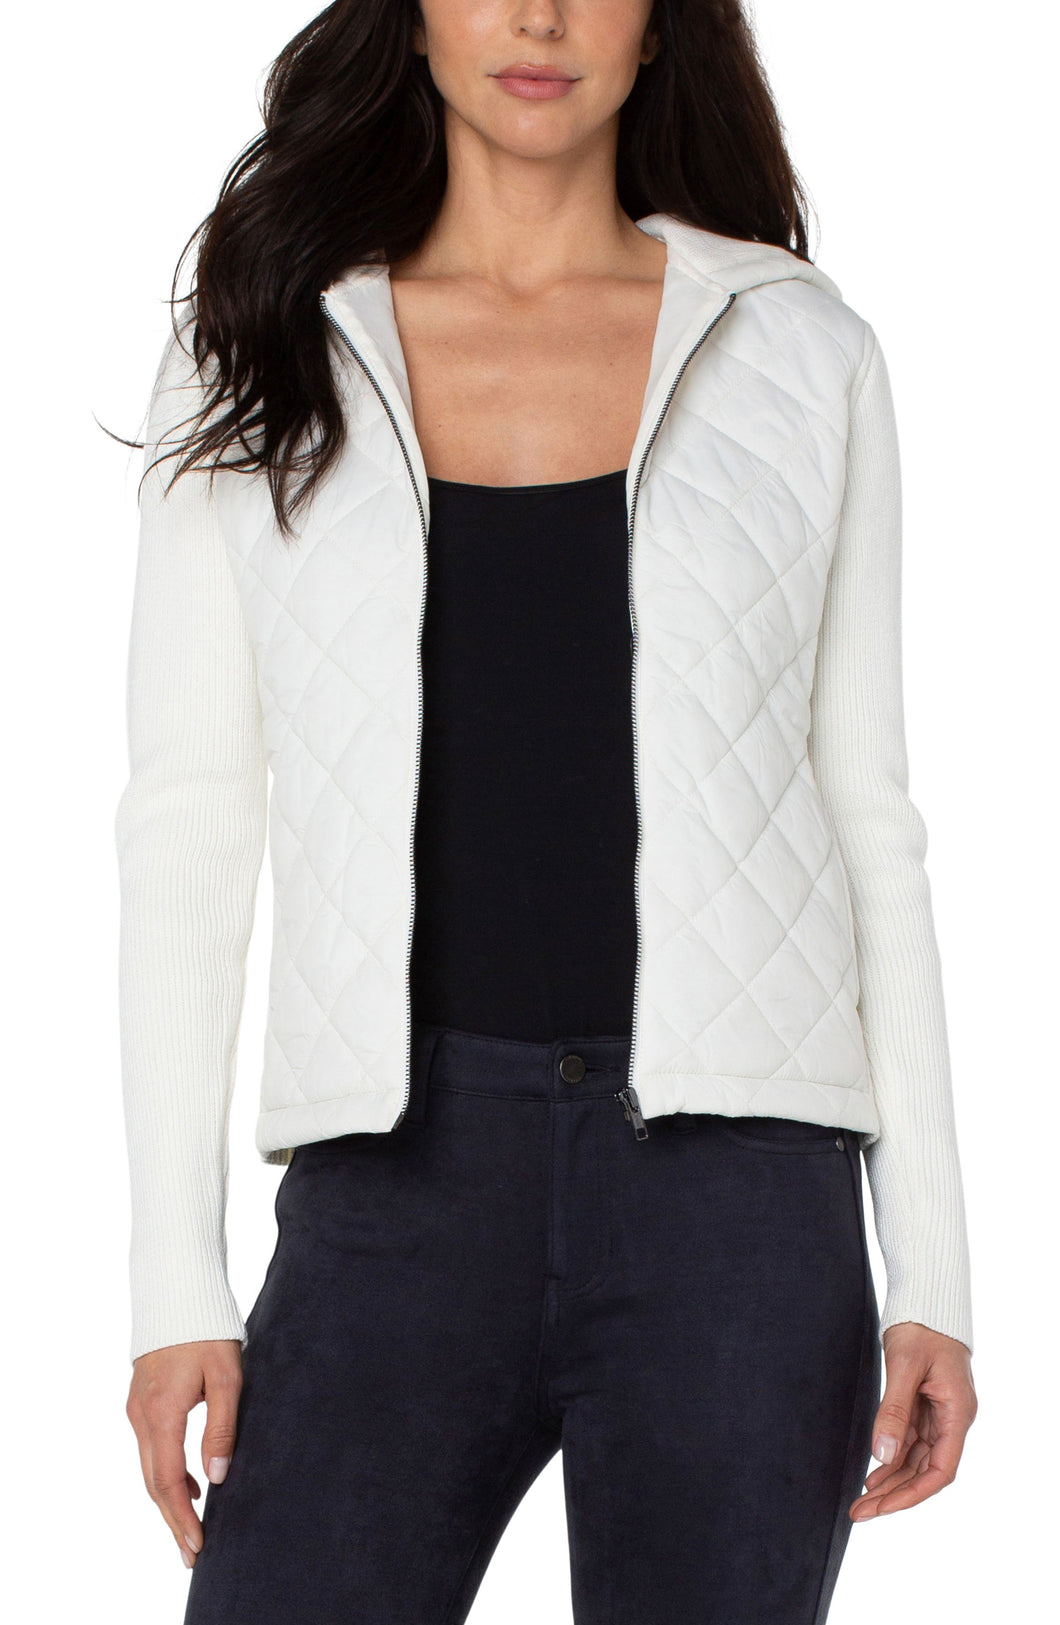 This diamond quilted hooded sweater jacket offers both comfort and easy wearability with ultimate style.  This versatile addition to your wardrobe pairs well with denim and sneakers for a casual vibe or can be dressed up with leggings and heels for a chic evening look. Color- Porcelain (off white.) Quilted front and hoodie with sweater sleeves and back. Long sleeve. Full zip.